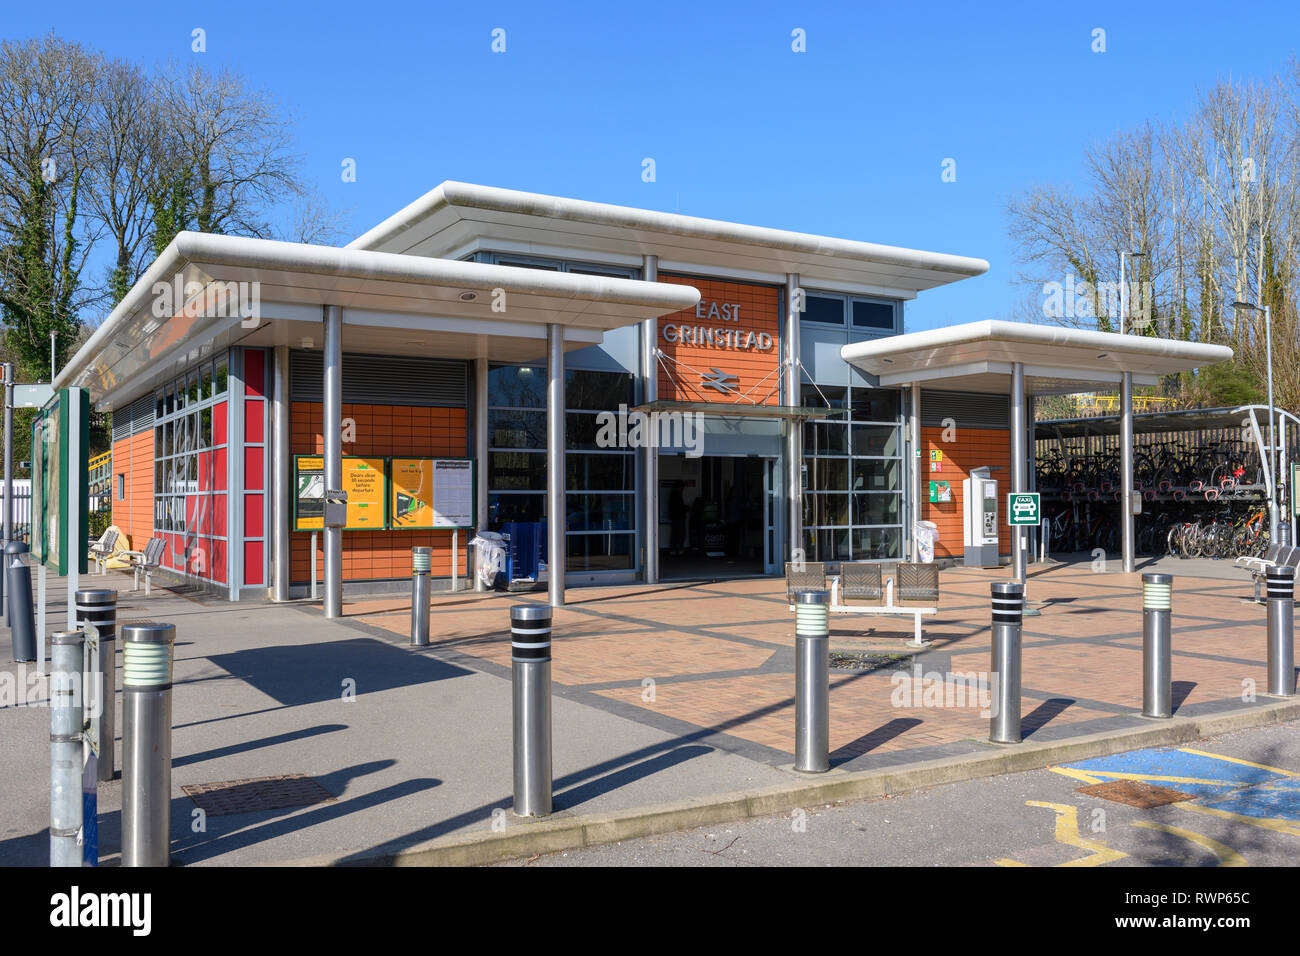 East Grinstead Railway Station - Main Entrance, East Grinstead, West Sussex, England, UK Stock Photo